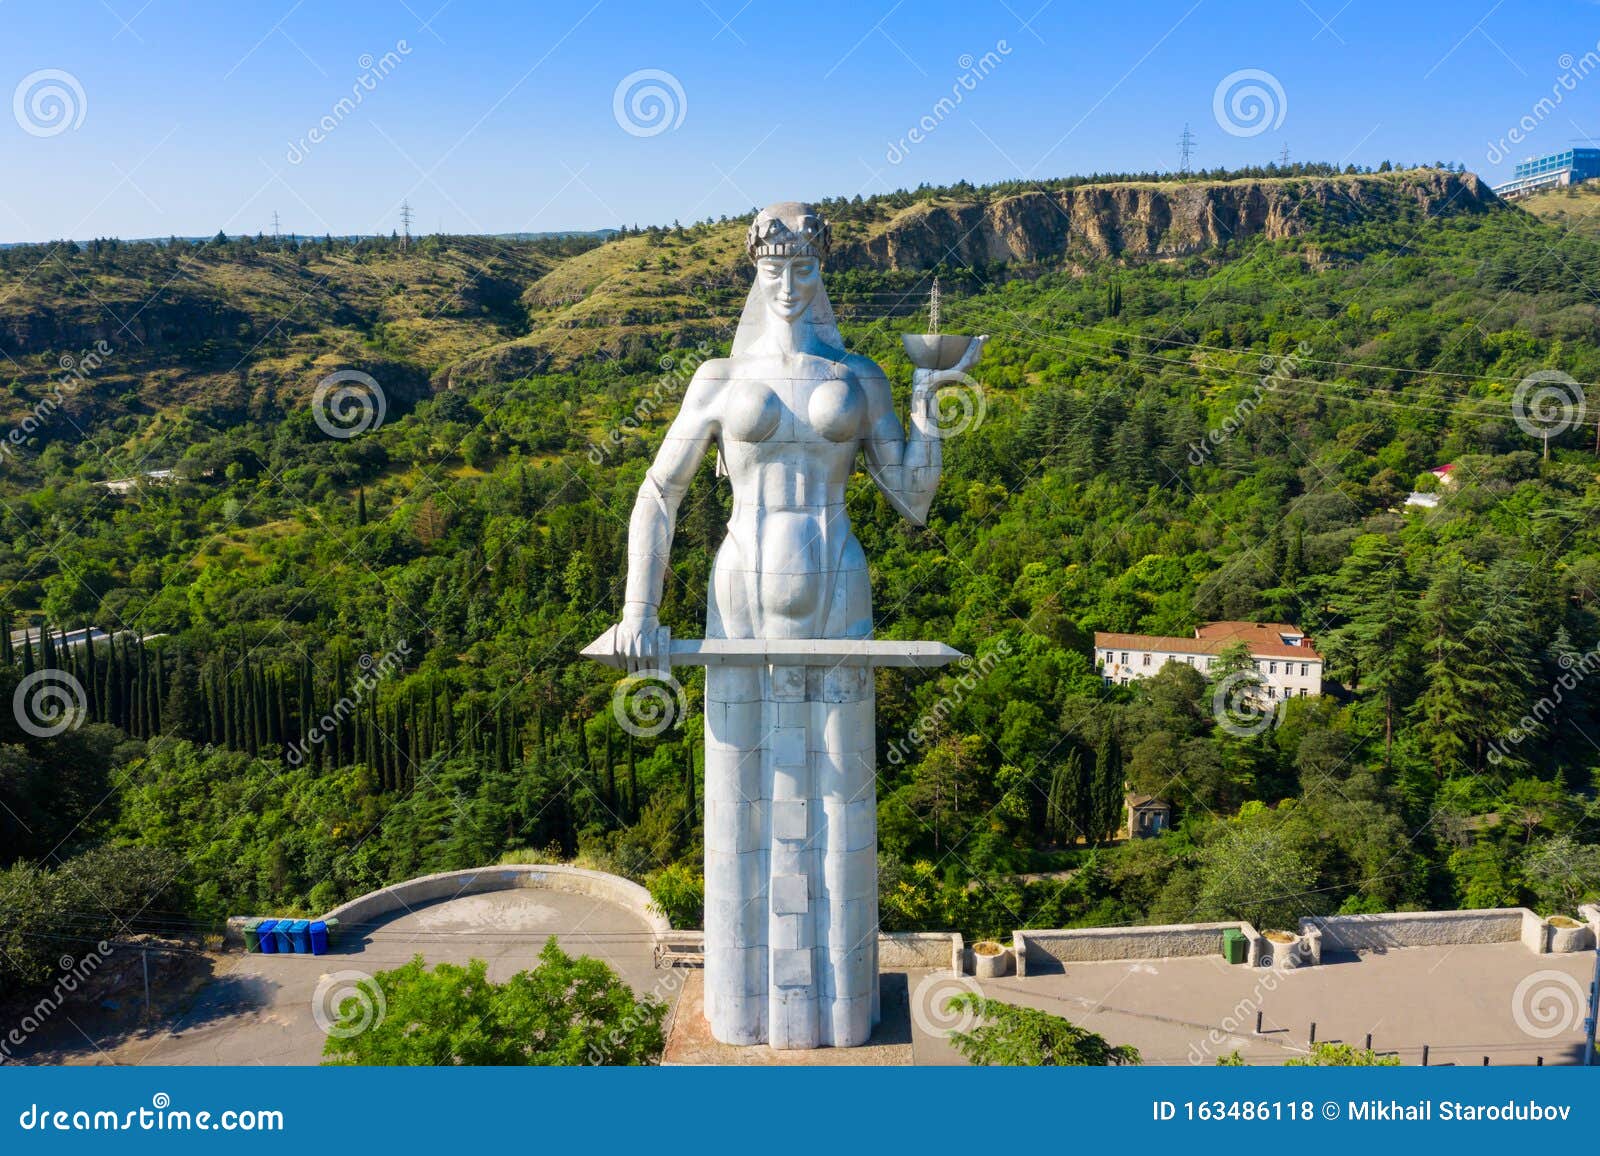 Tbilisi Georgia June 12 19 Statue Of Mother Georgia In Tbilisi Georgia The Memorial Is 50 Meters High And Watches Over Stock Photo Image Of Construction Kartlis